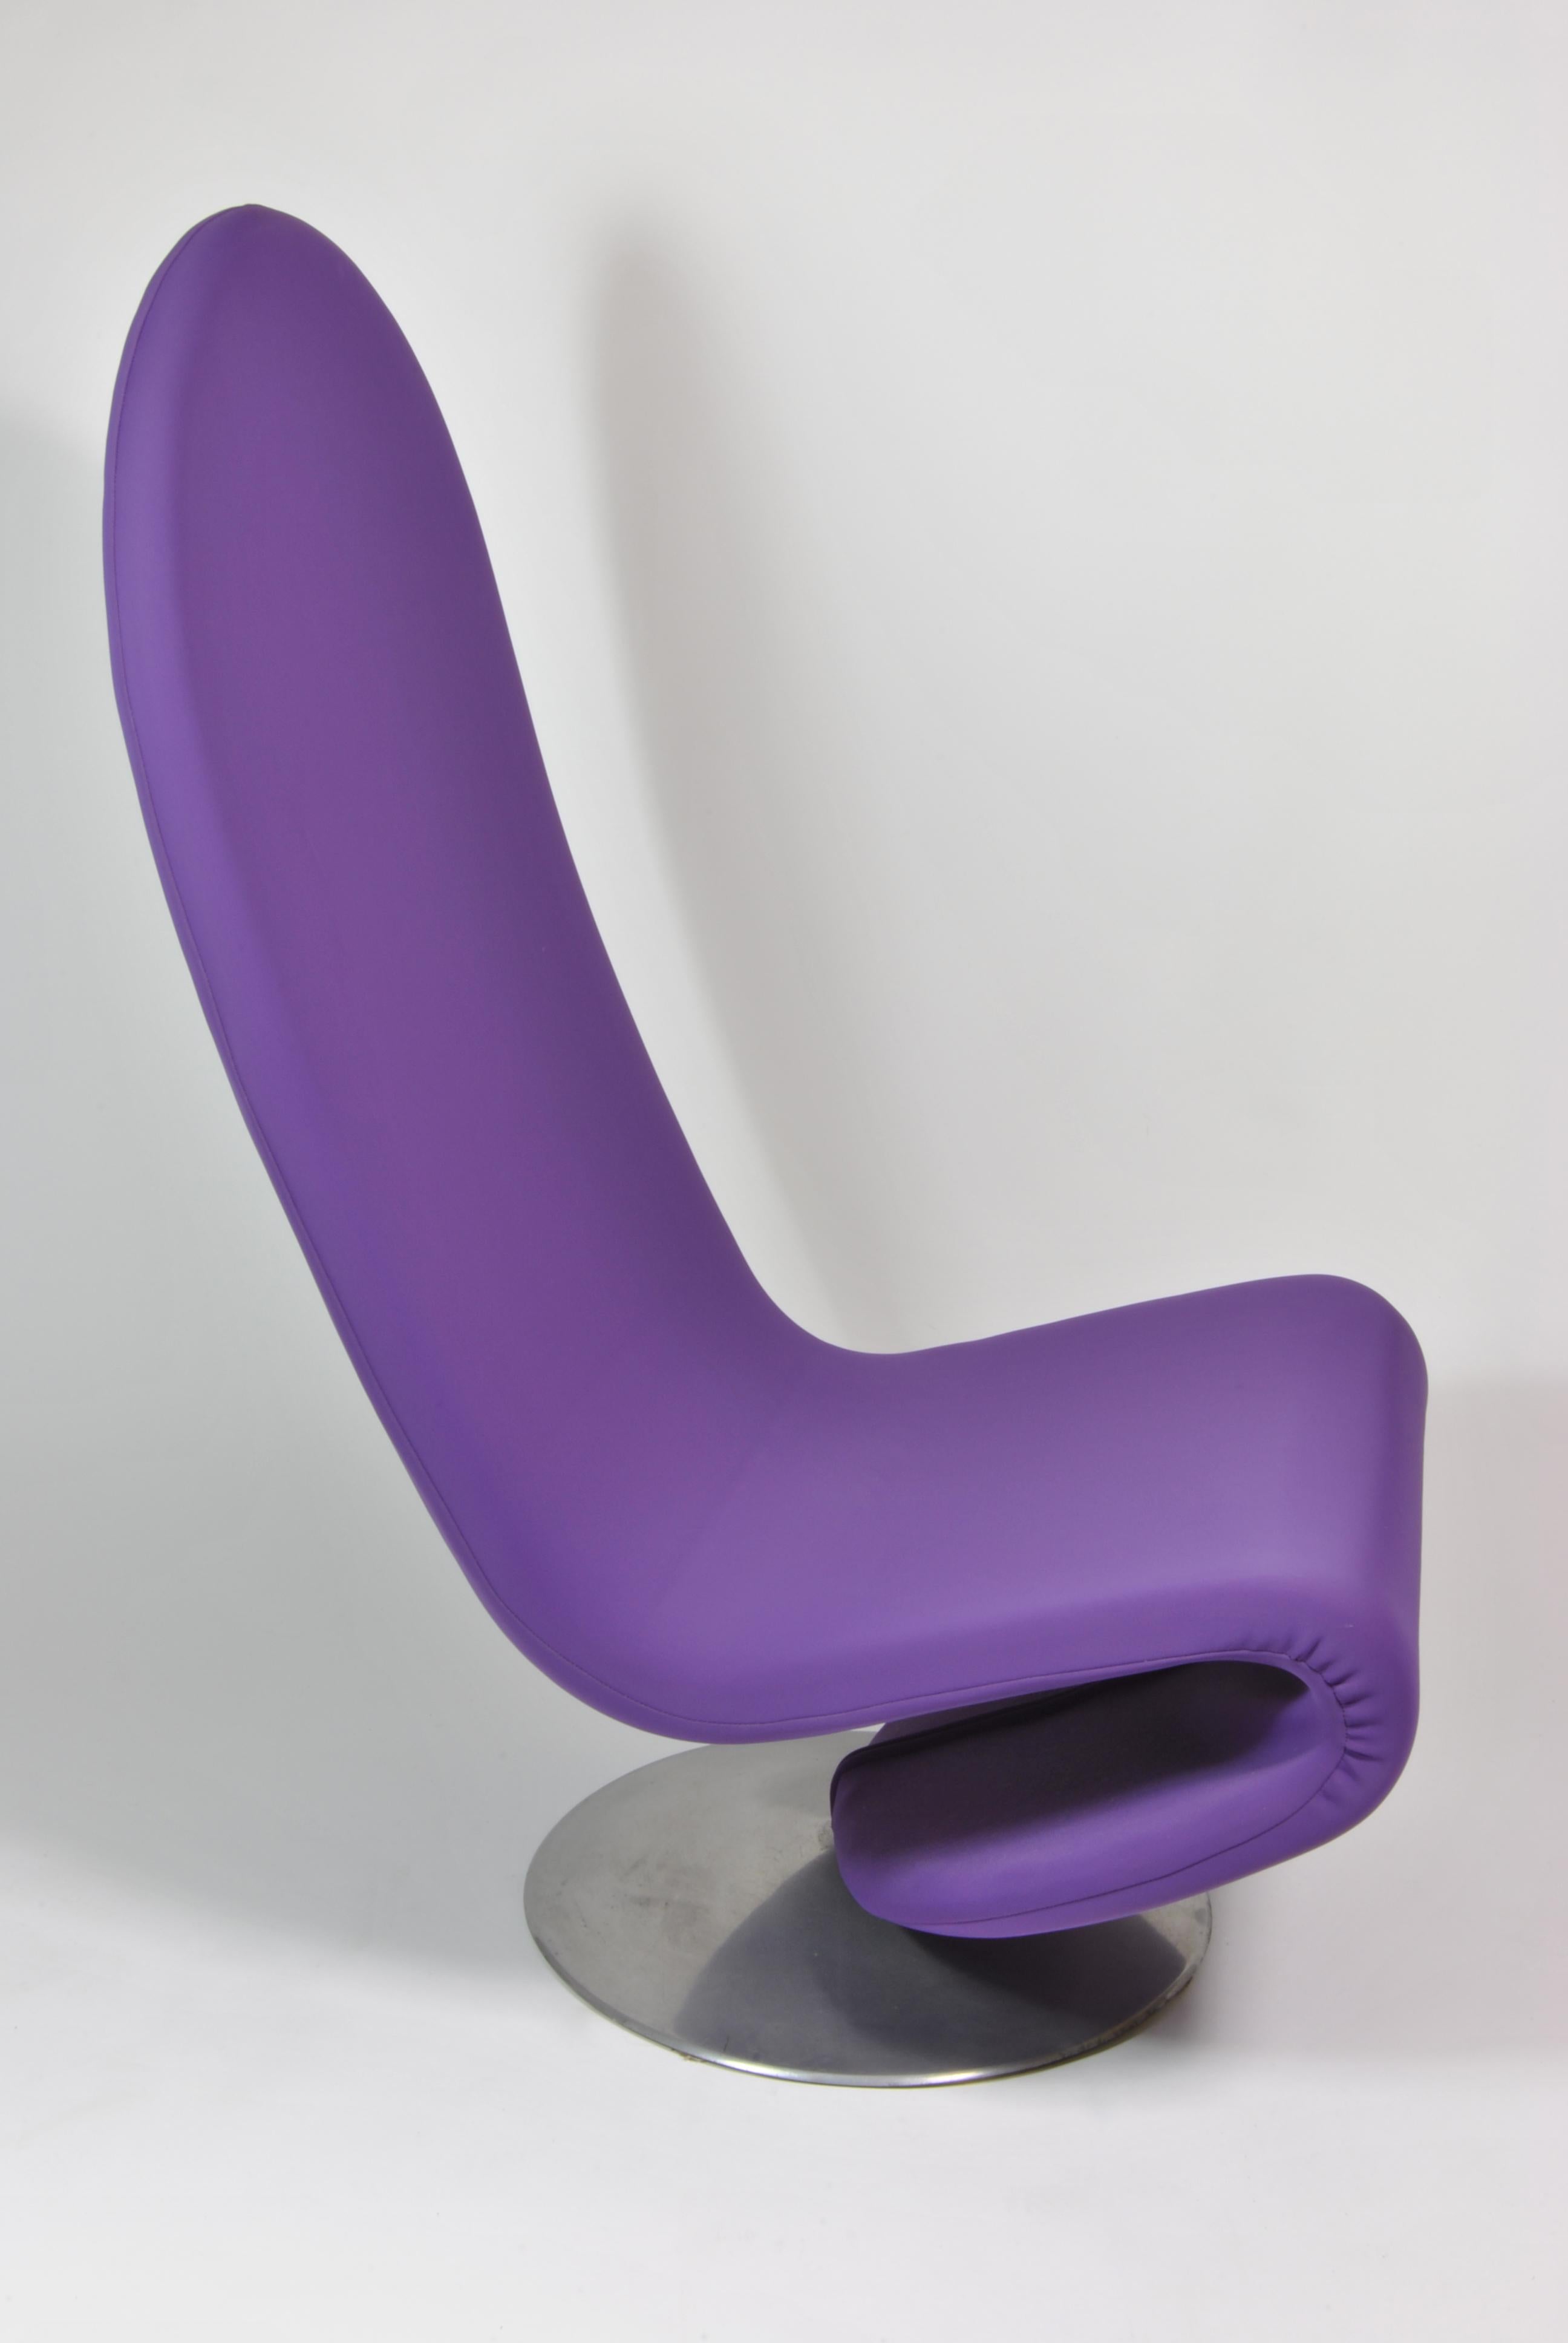 Vintage System 1-2-3 chair, design by Verner Panton for Fritz Hansen, 1960s, upholstered with new 